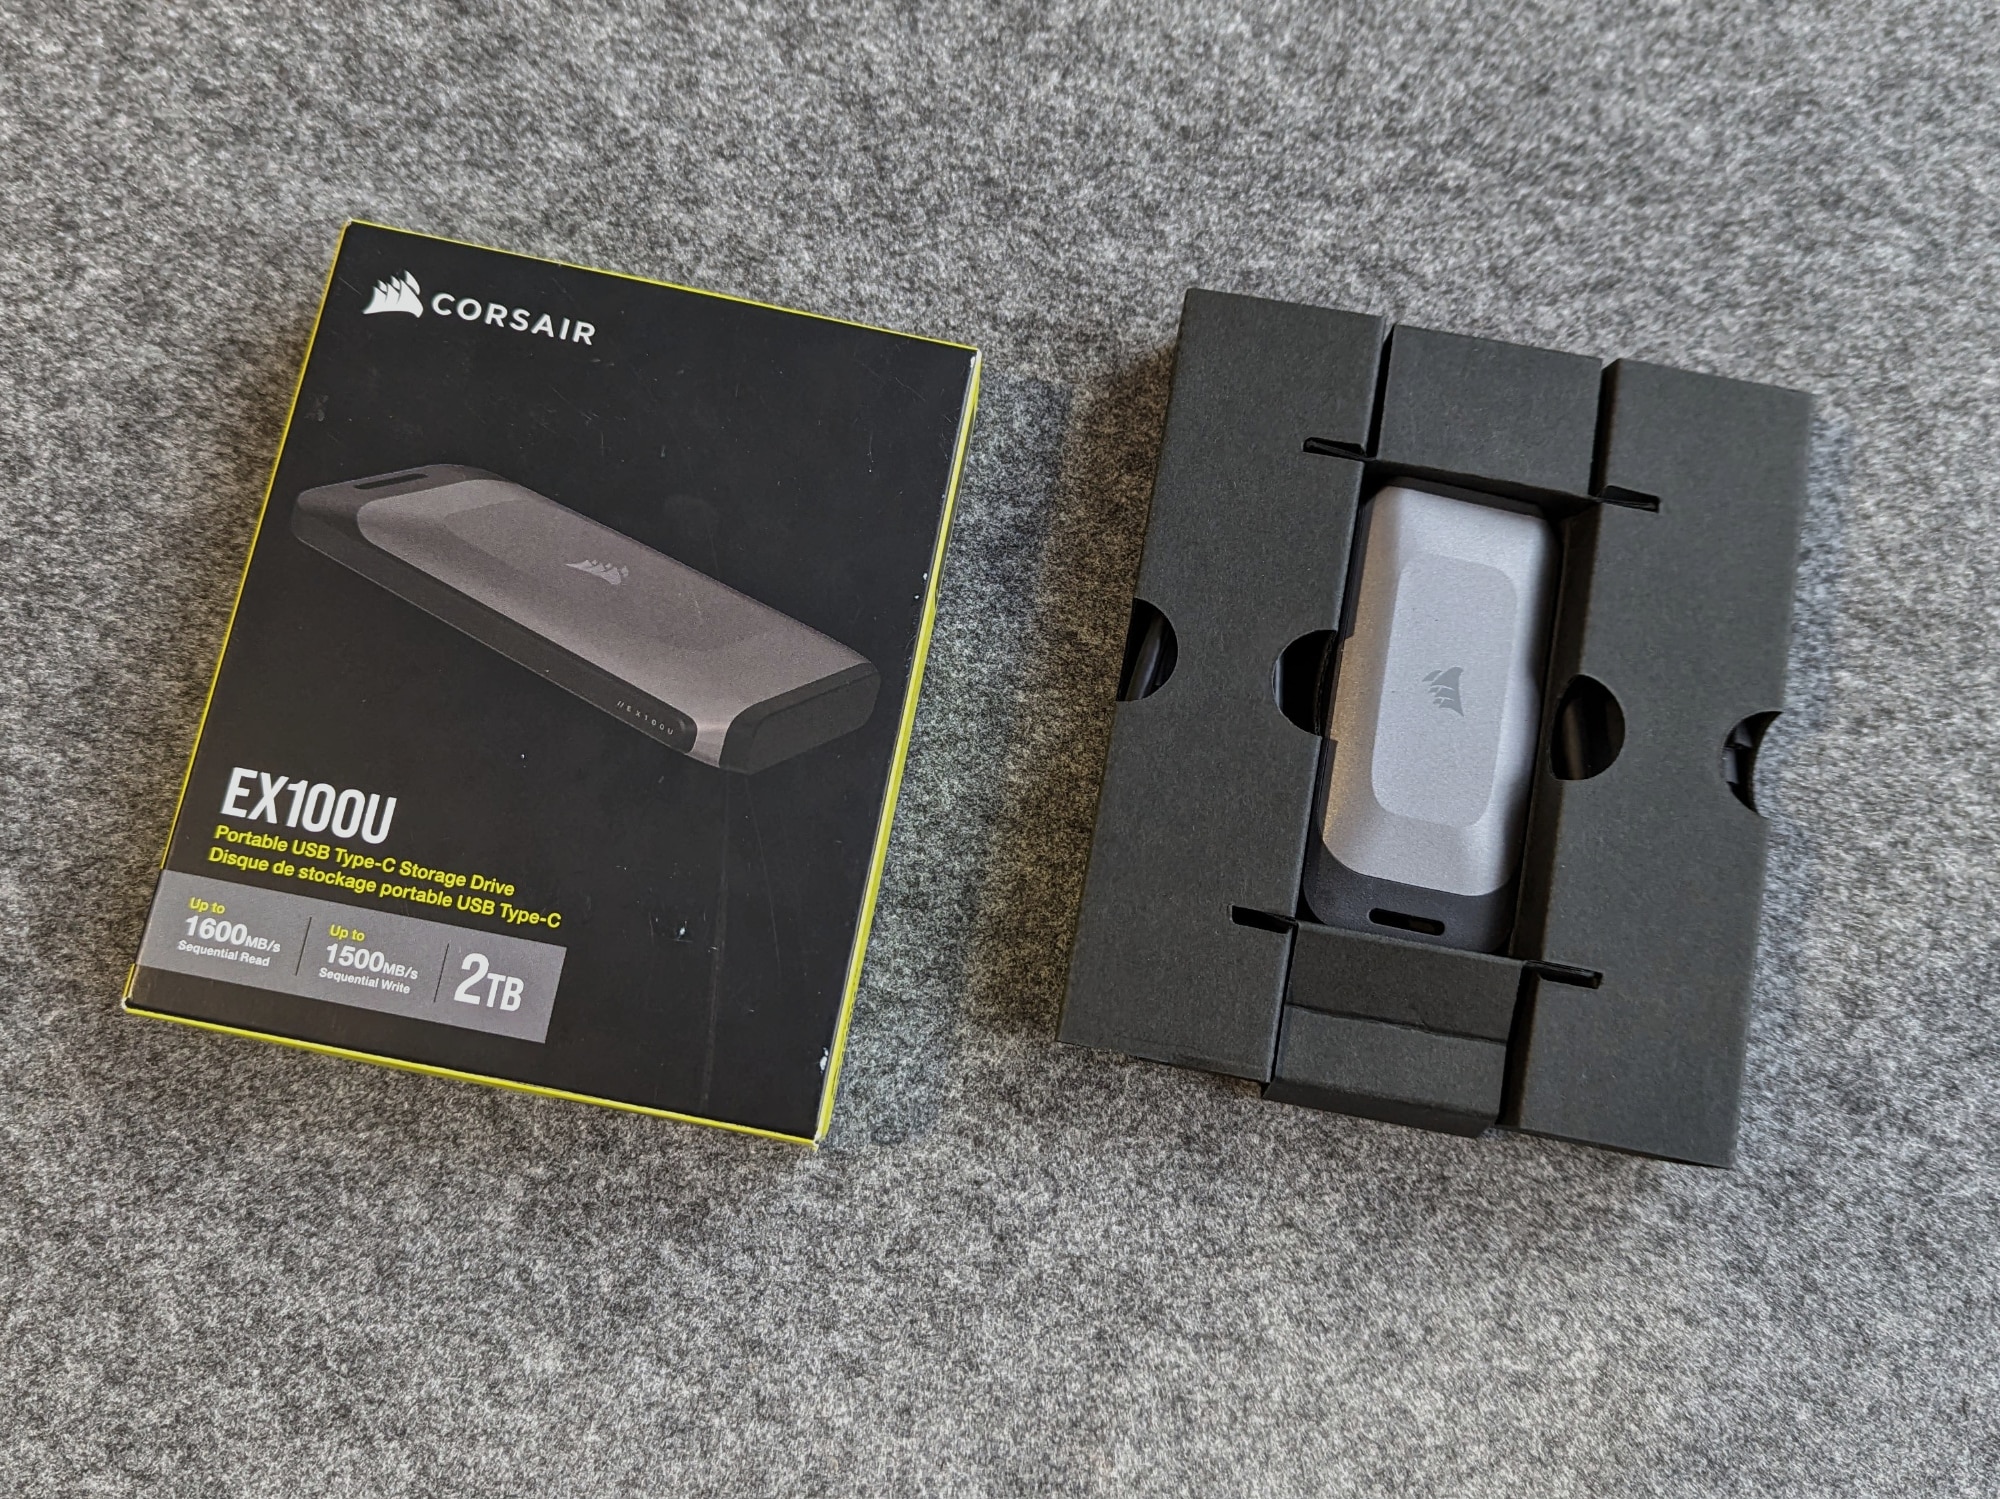 Corsair EX100U review - Corsair's compact SSD for on the go